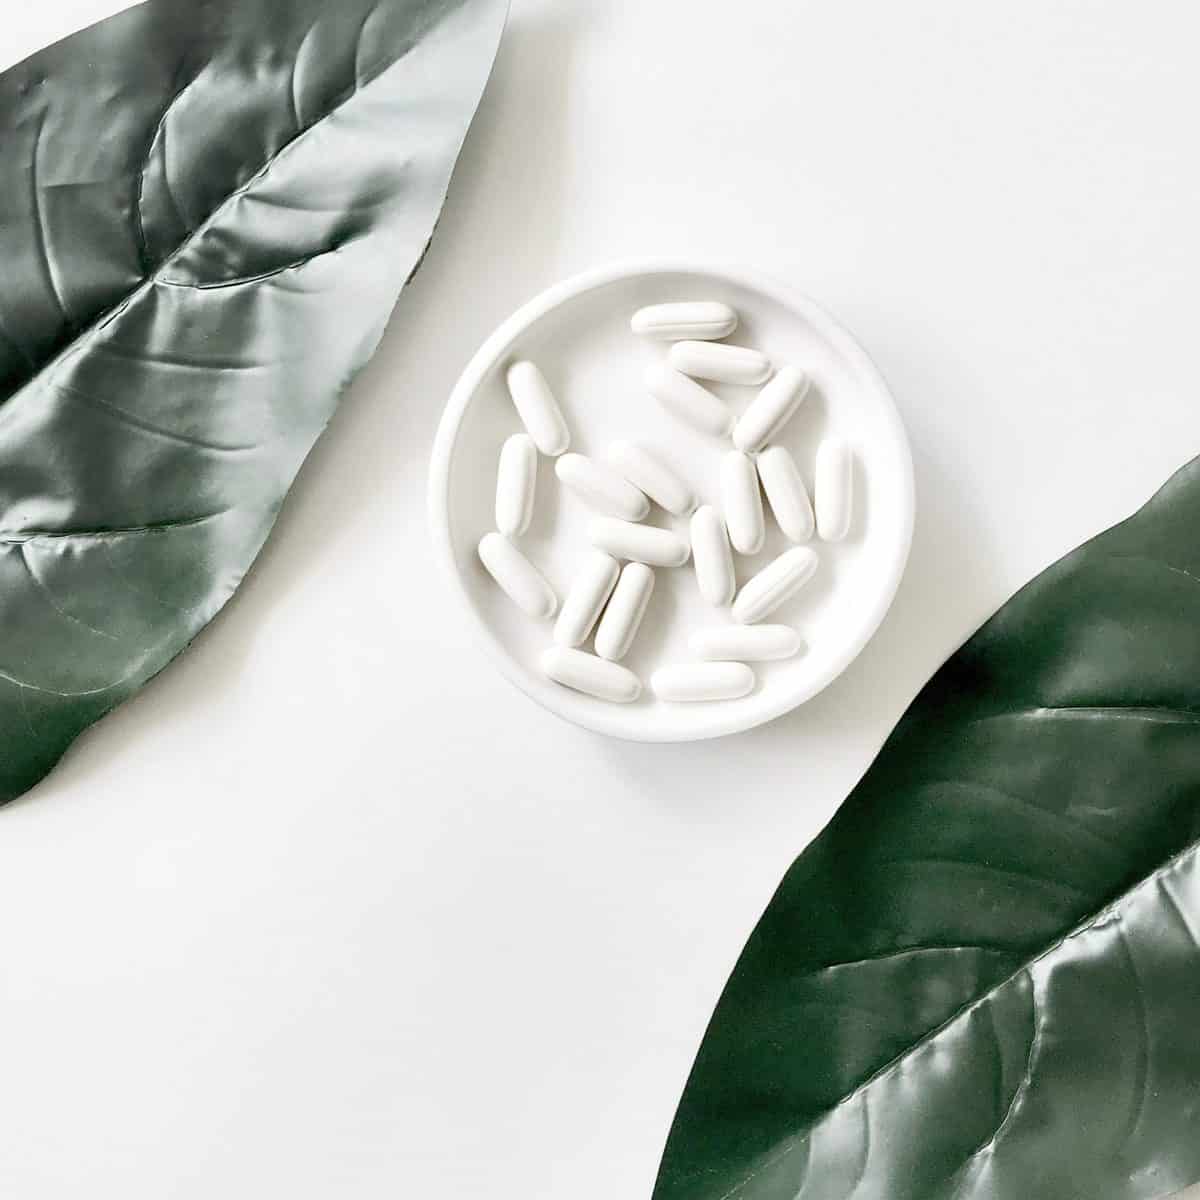 Probiotic pills in a white bowl